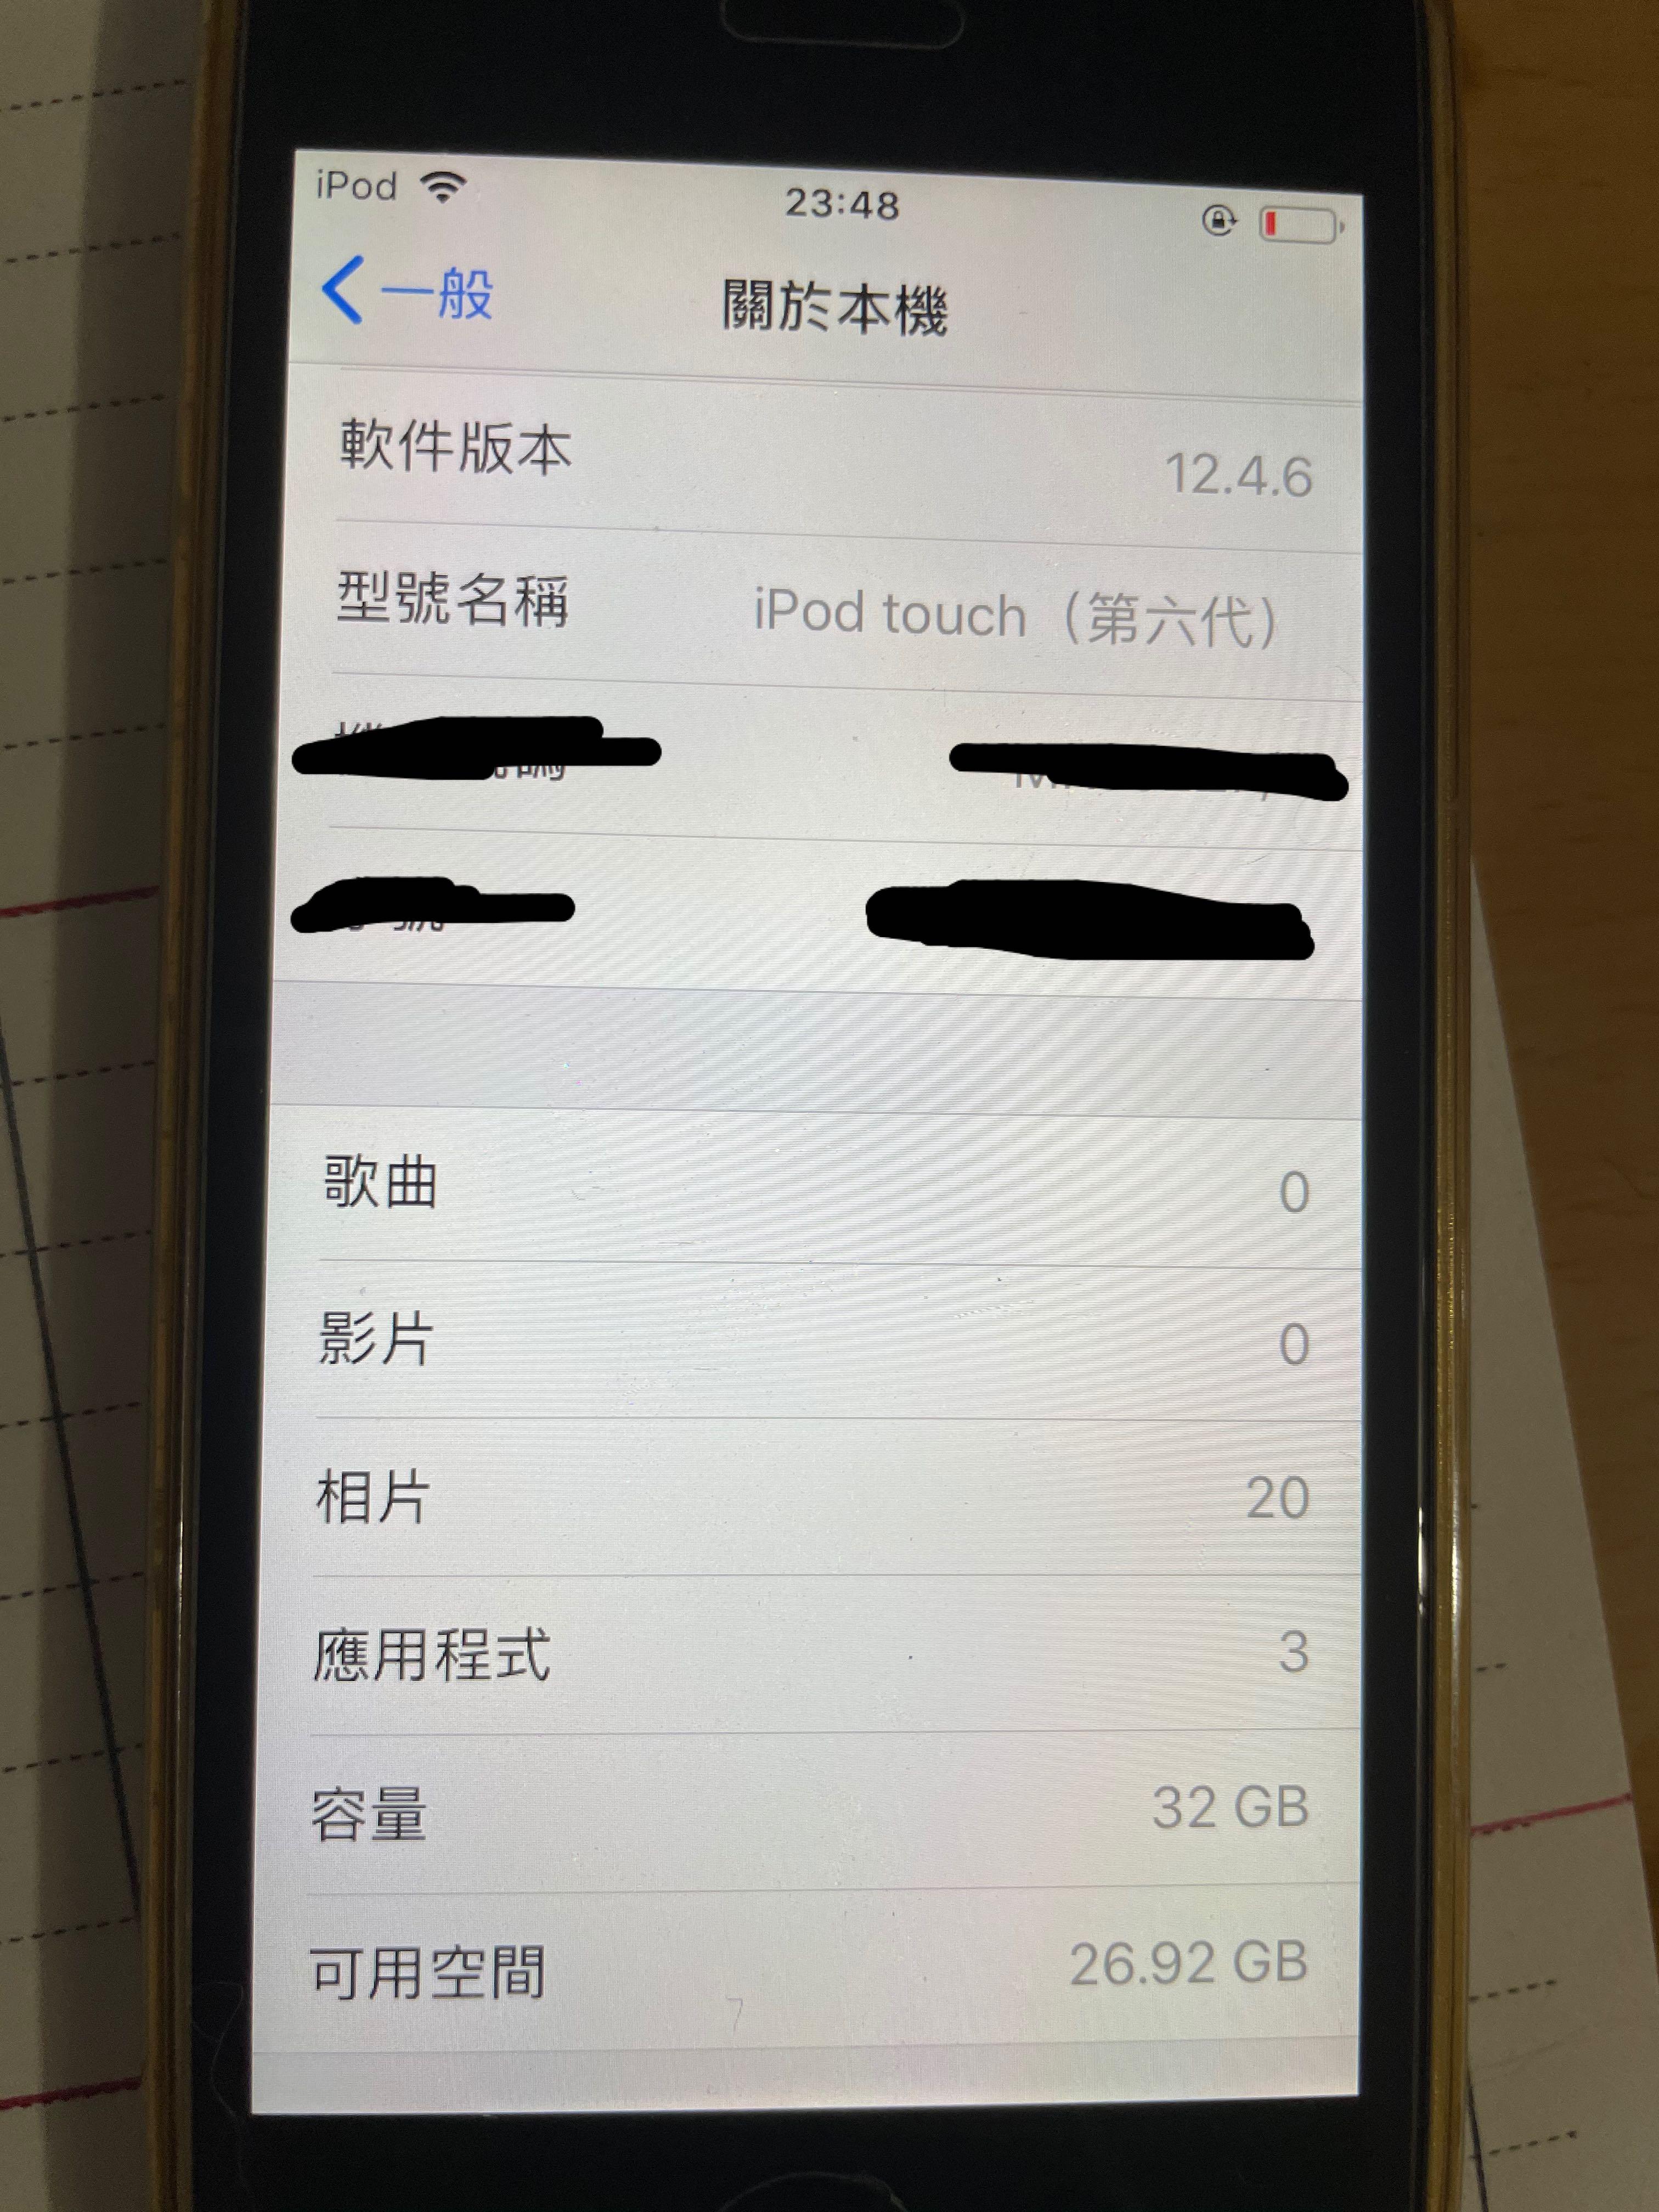 Stadion lanthaan Intentie IPOD TOUCH 6 32gb 黑色, 電子產品, 其他- Carousell